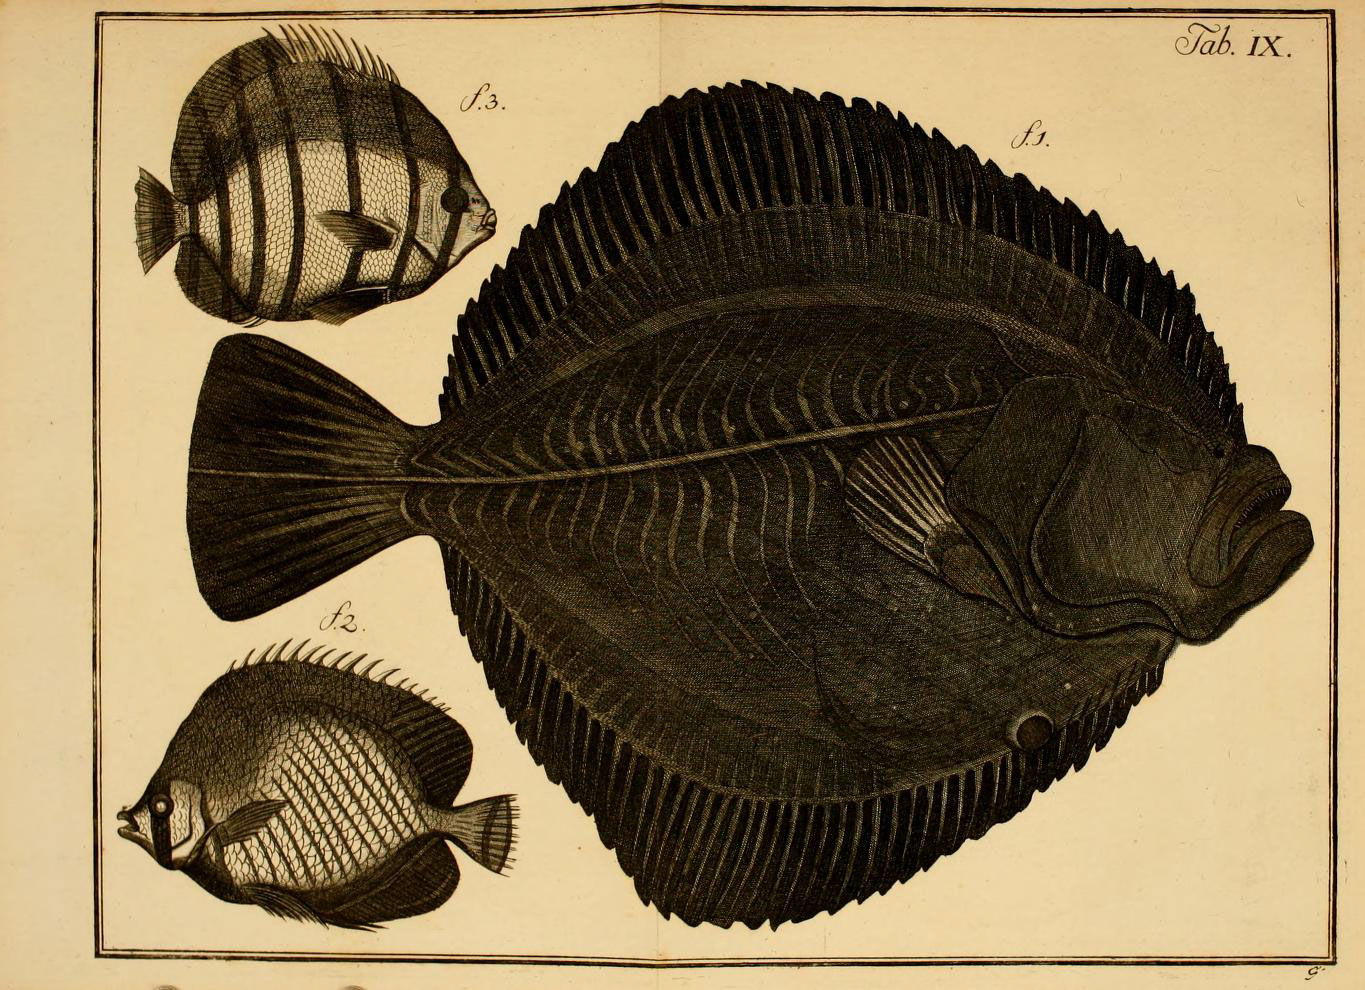 a fish and other sea creatures are depicted in this vintage print